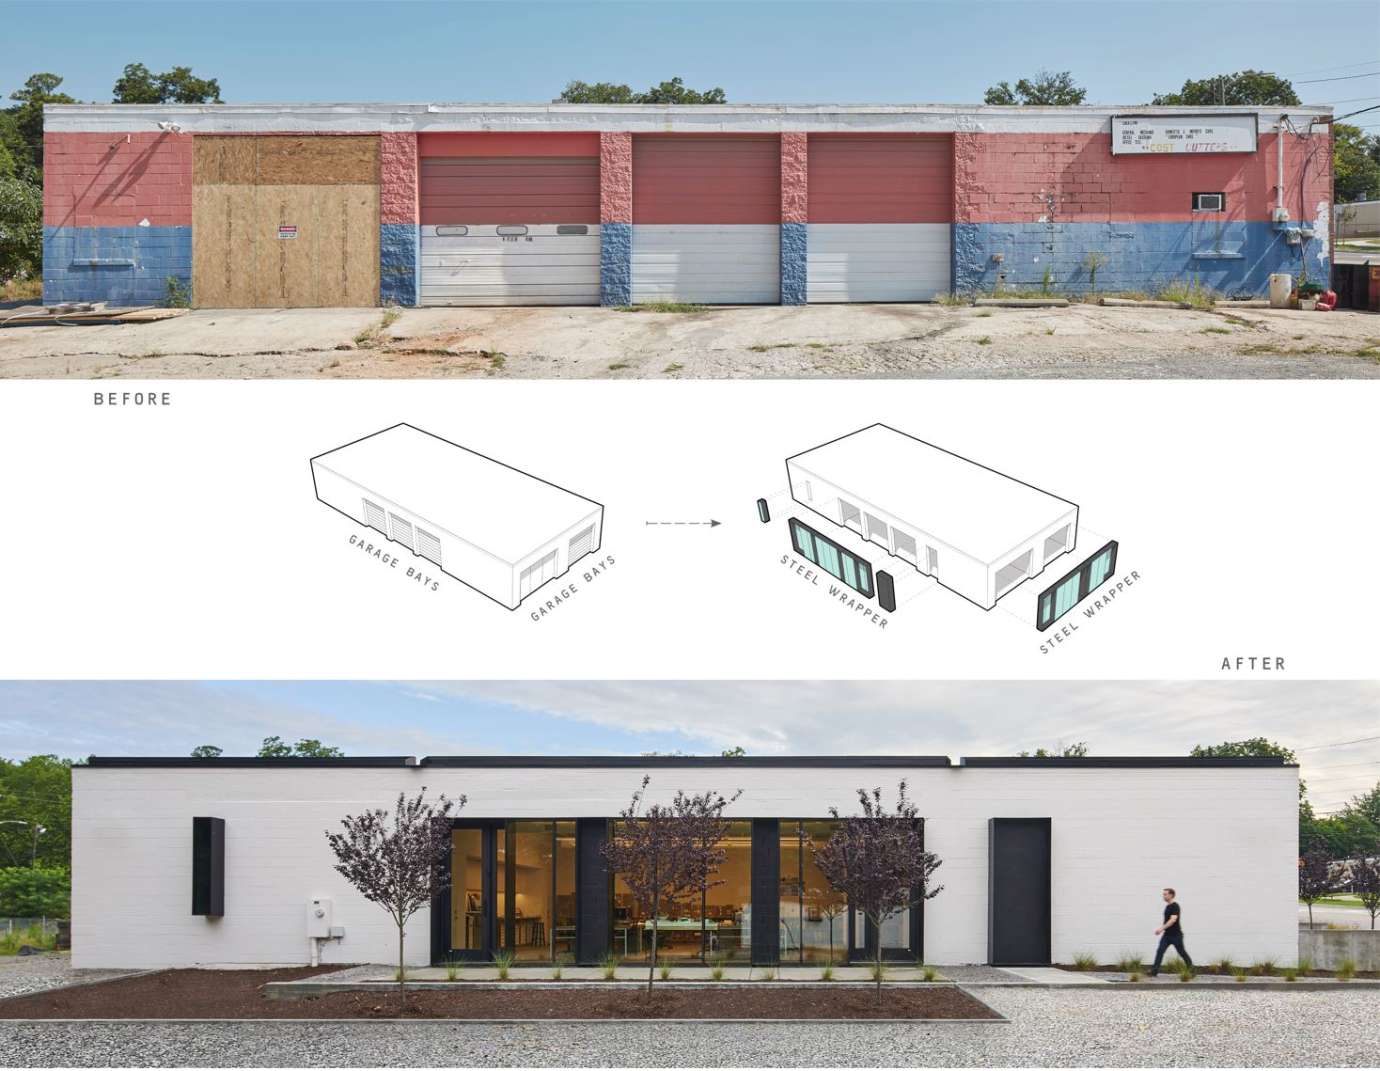 Before and after image of the building at 716 S. Saunders Street showing urban adaptive reuse